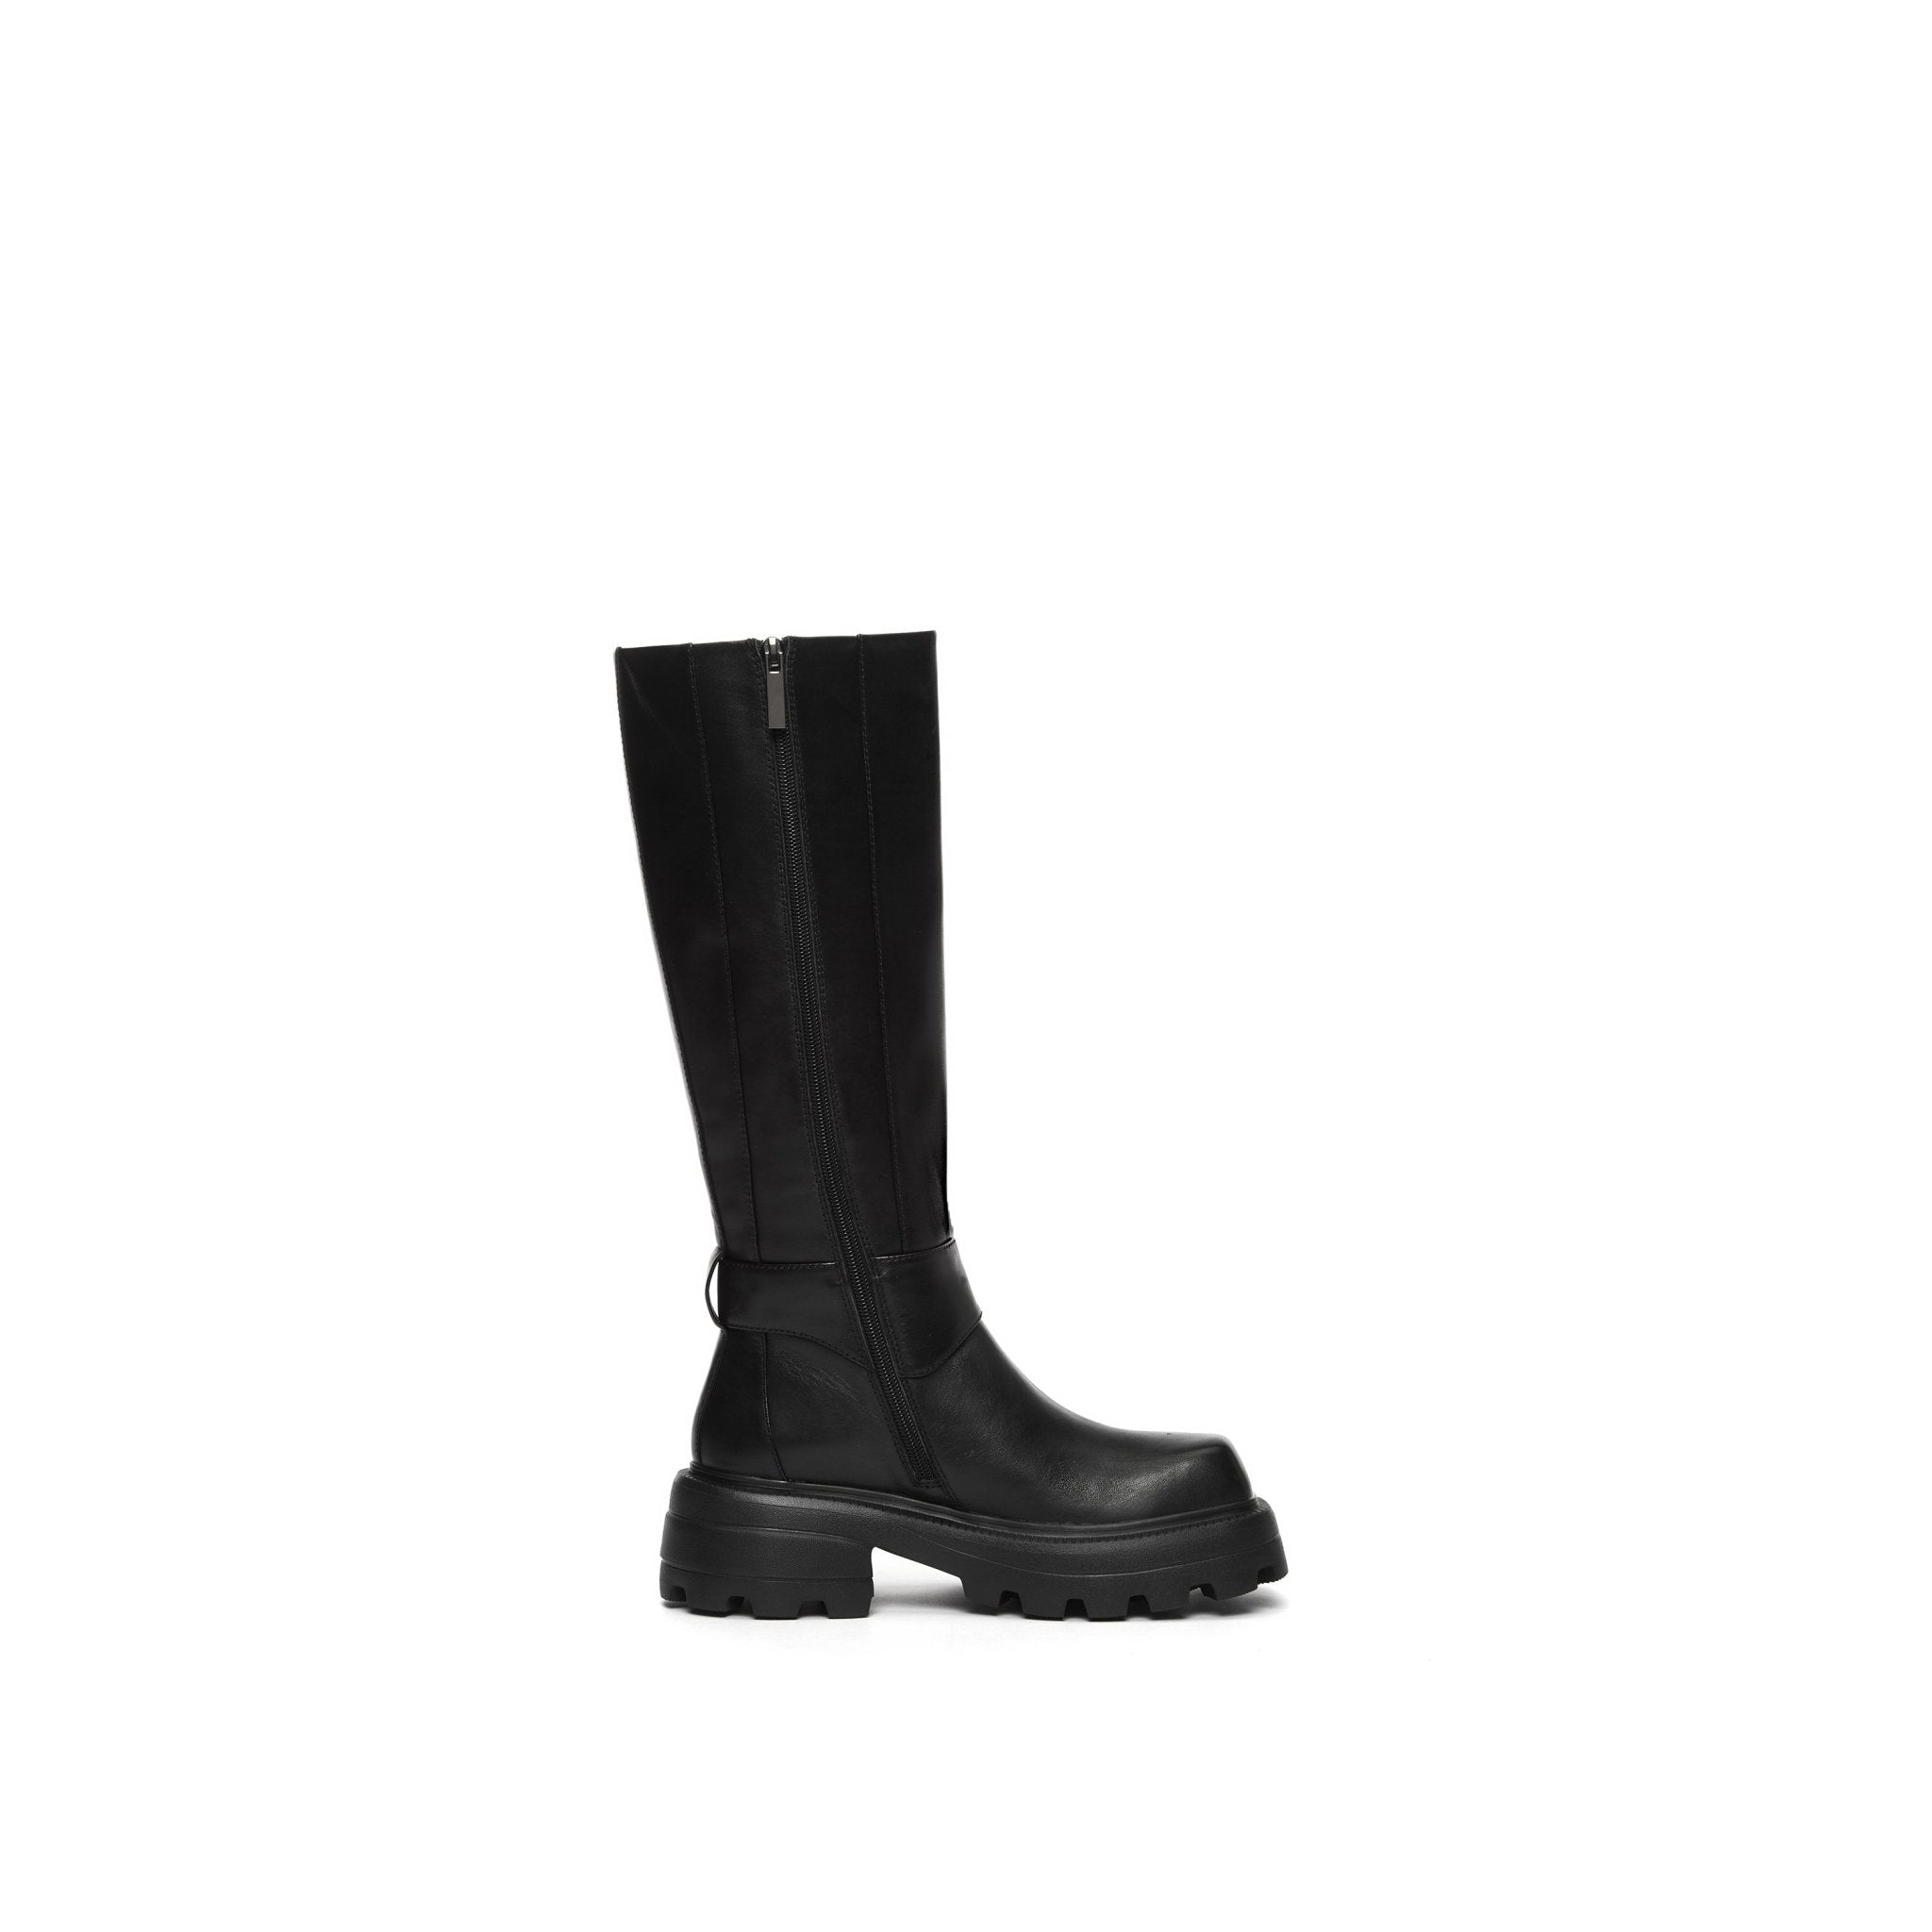 LOST IN ECHO Black Square Toe Knee High Boots | MADA IN CHINA